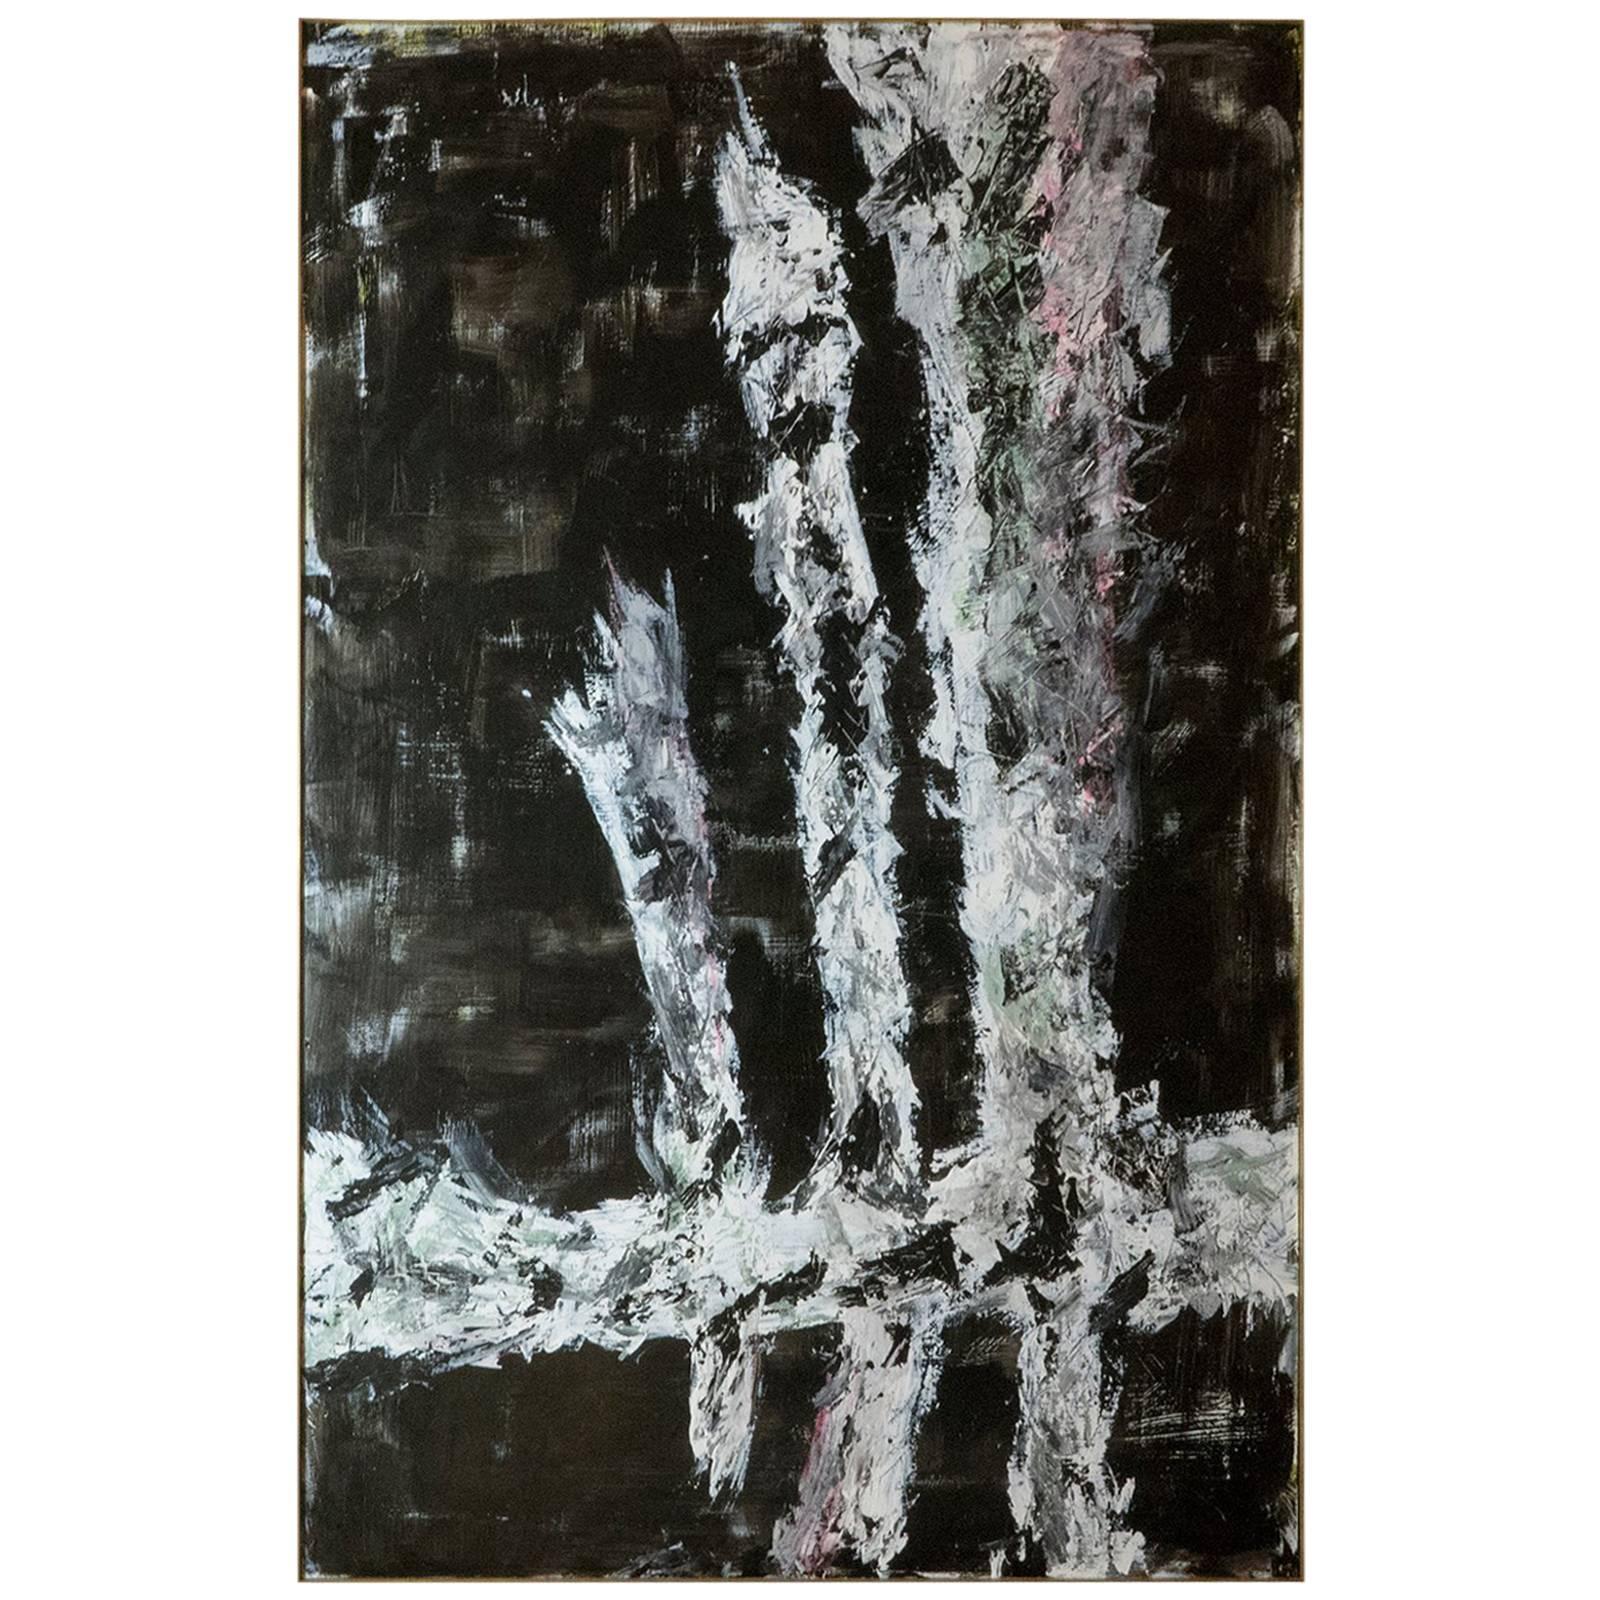 Marco Croce "Untitled" Black and White Abstract Painting, Italy 2016.